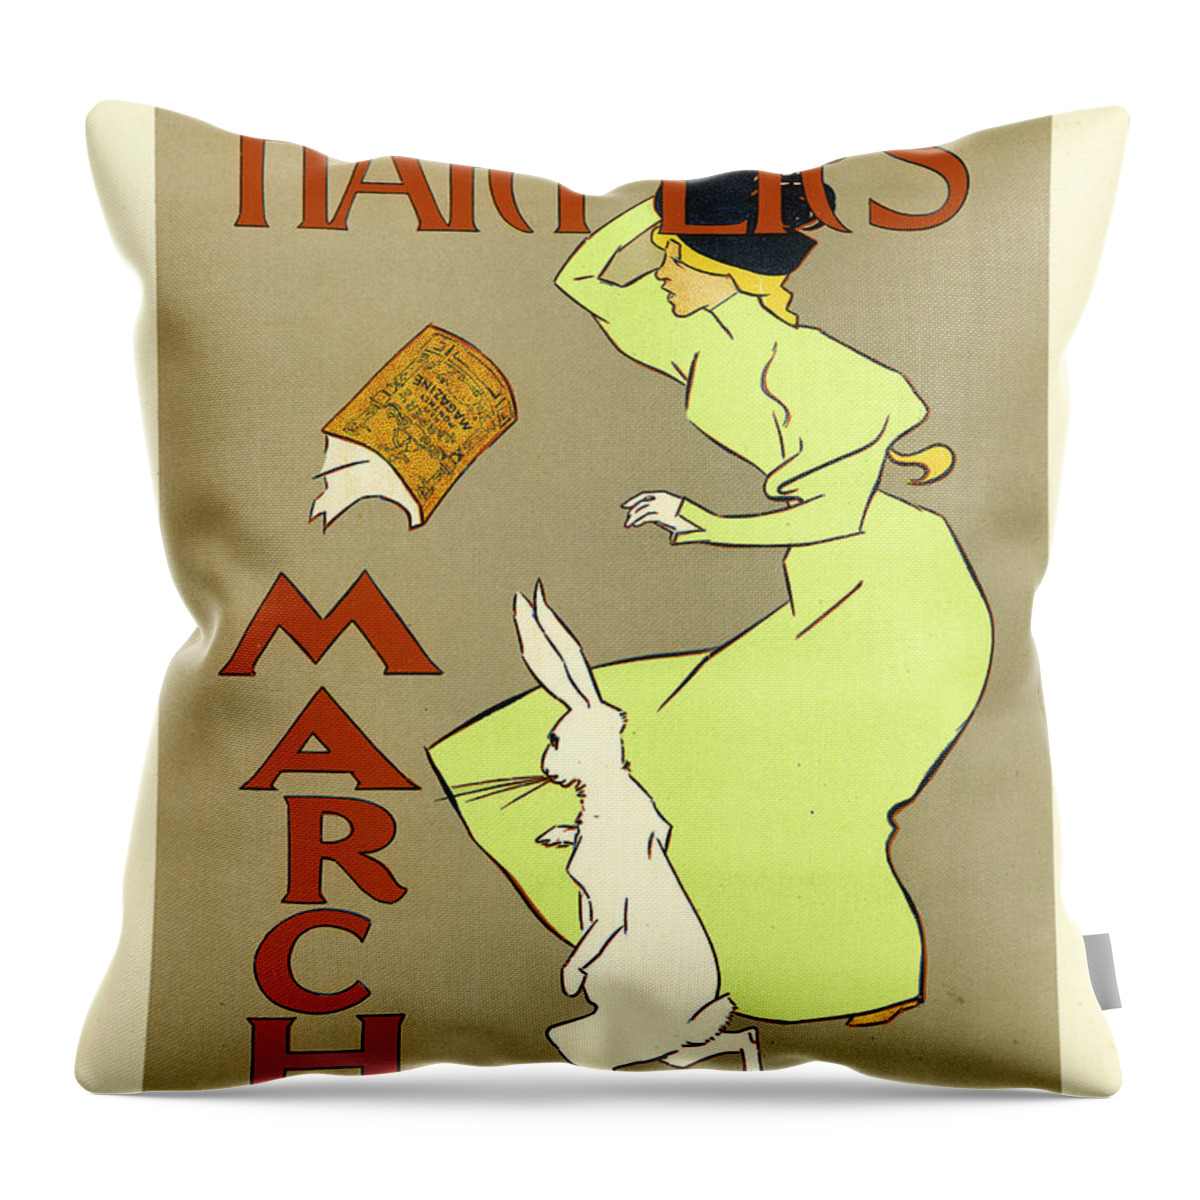 Harpers March Throw Pillow featuring the painting Harpers March by Edward Penfield